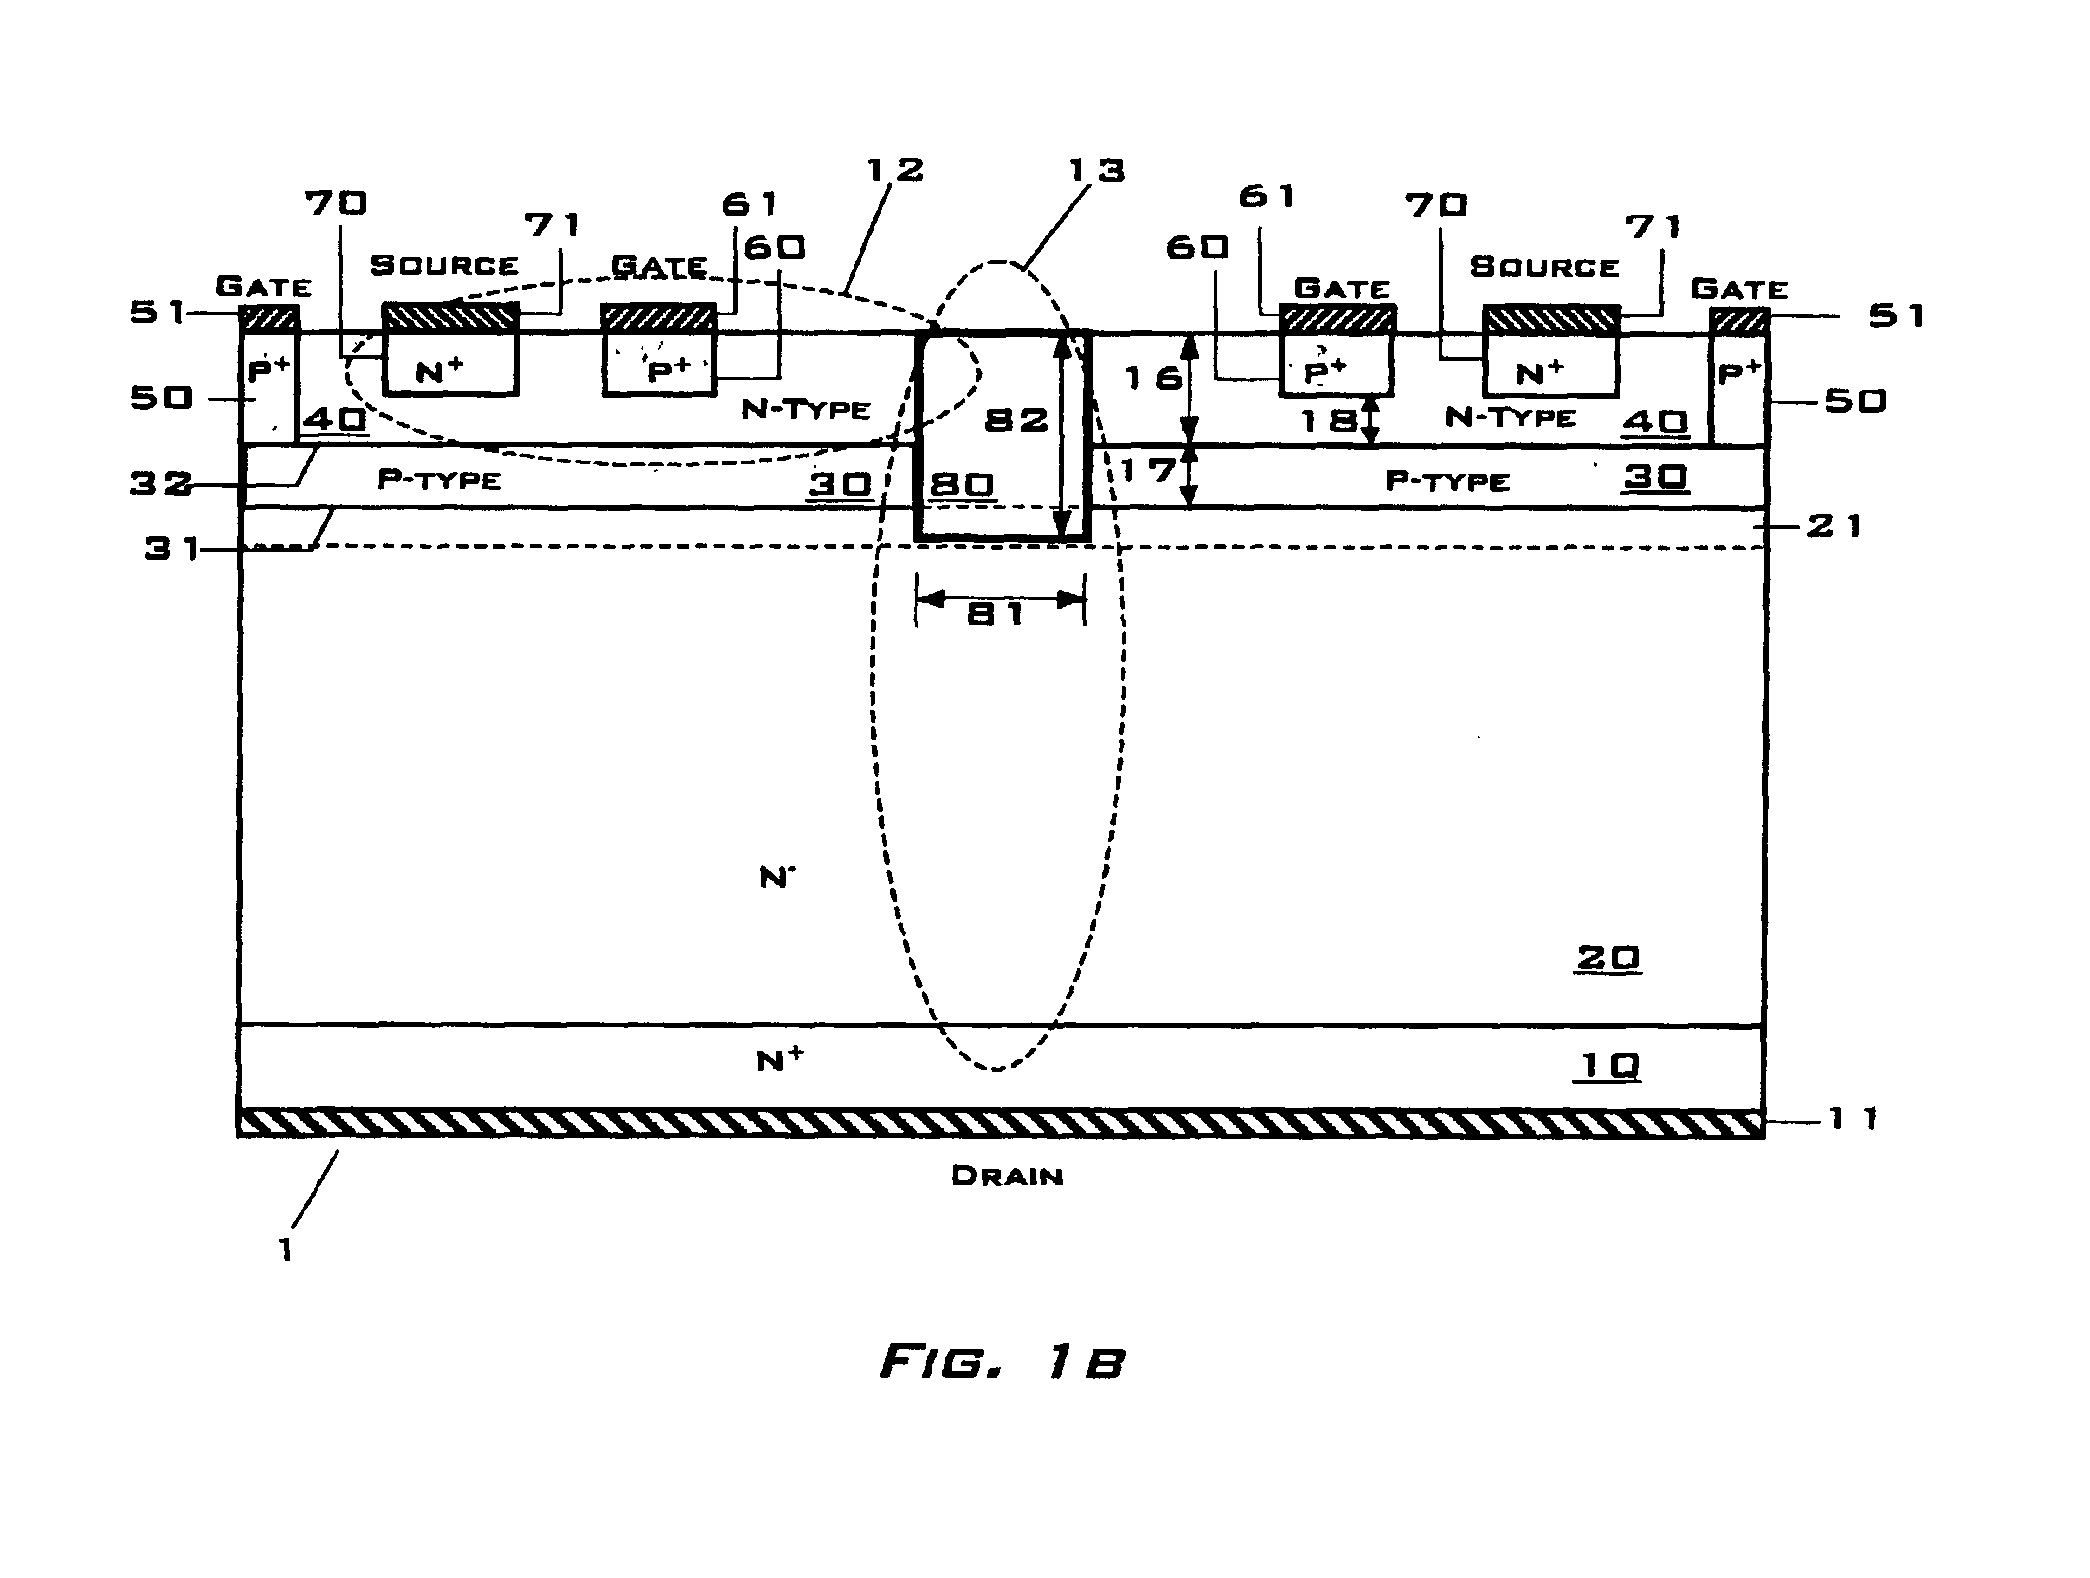 Double-gated vertical junction field effect power transistor